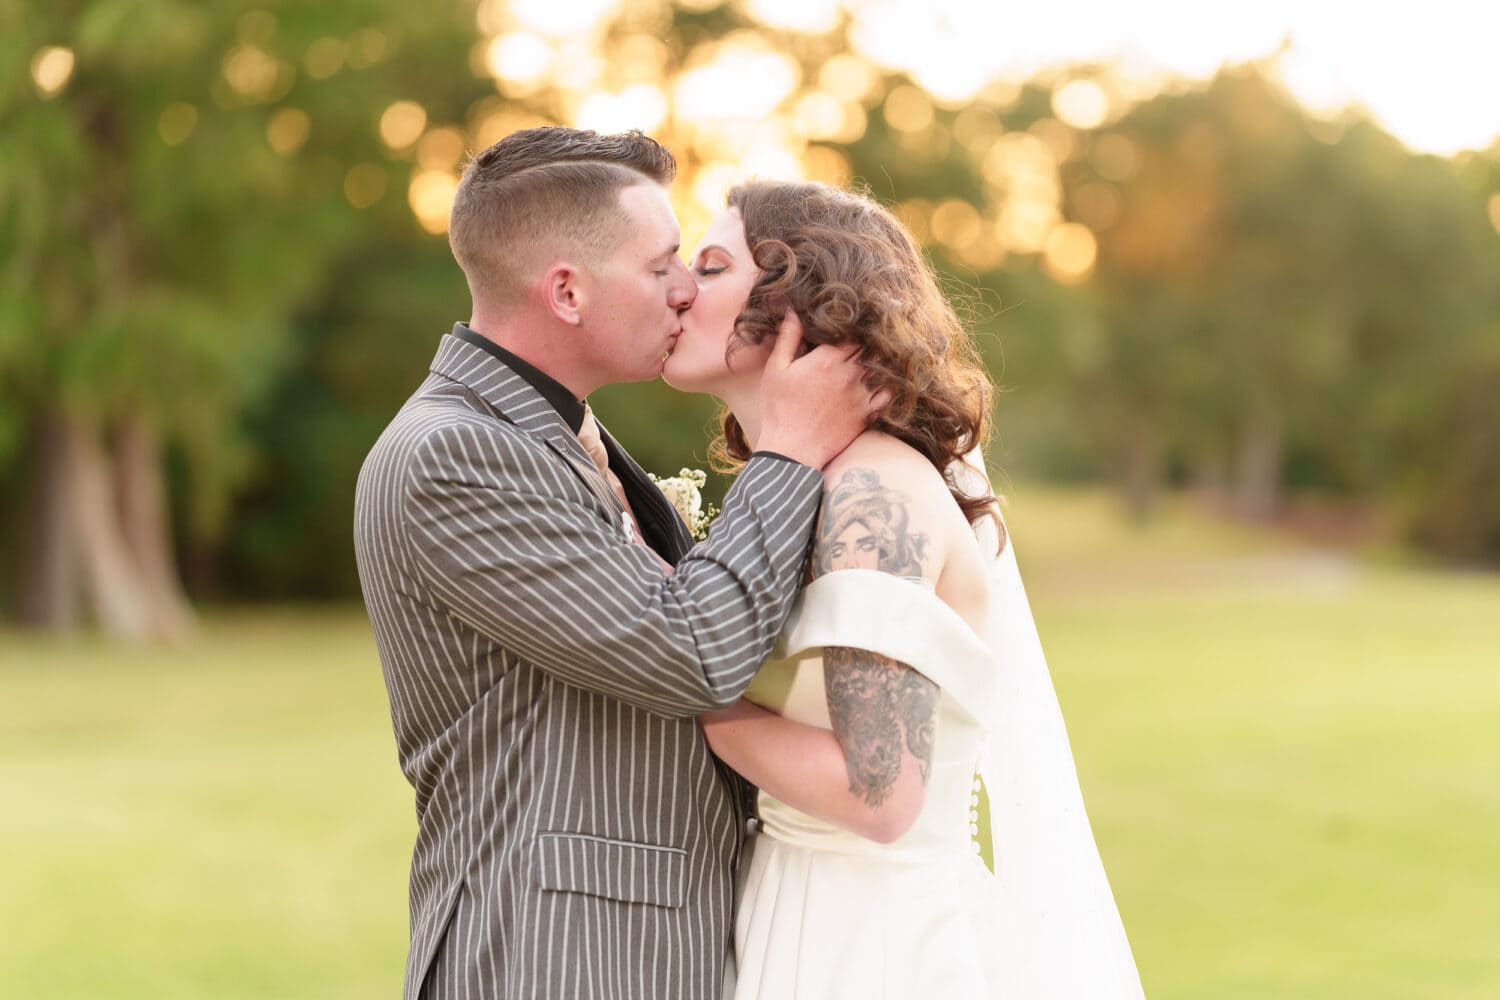 Kiss with bokeh balls from the sunset behind the bride and groom - Litchfield Country Club